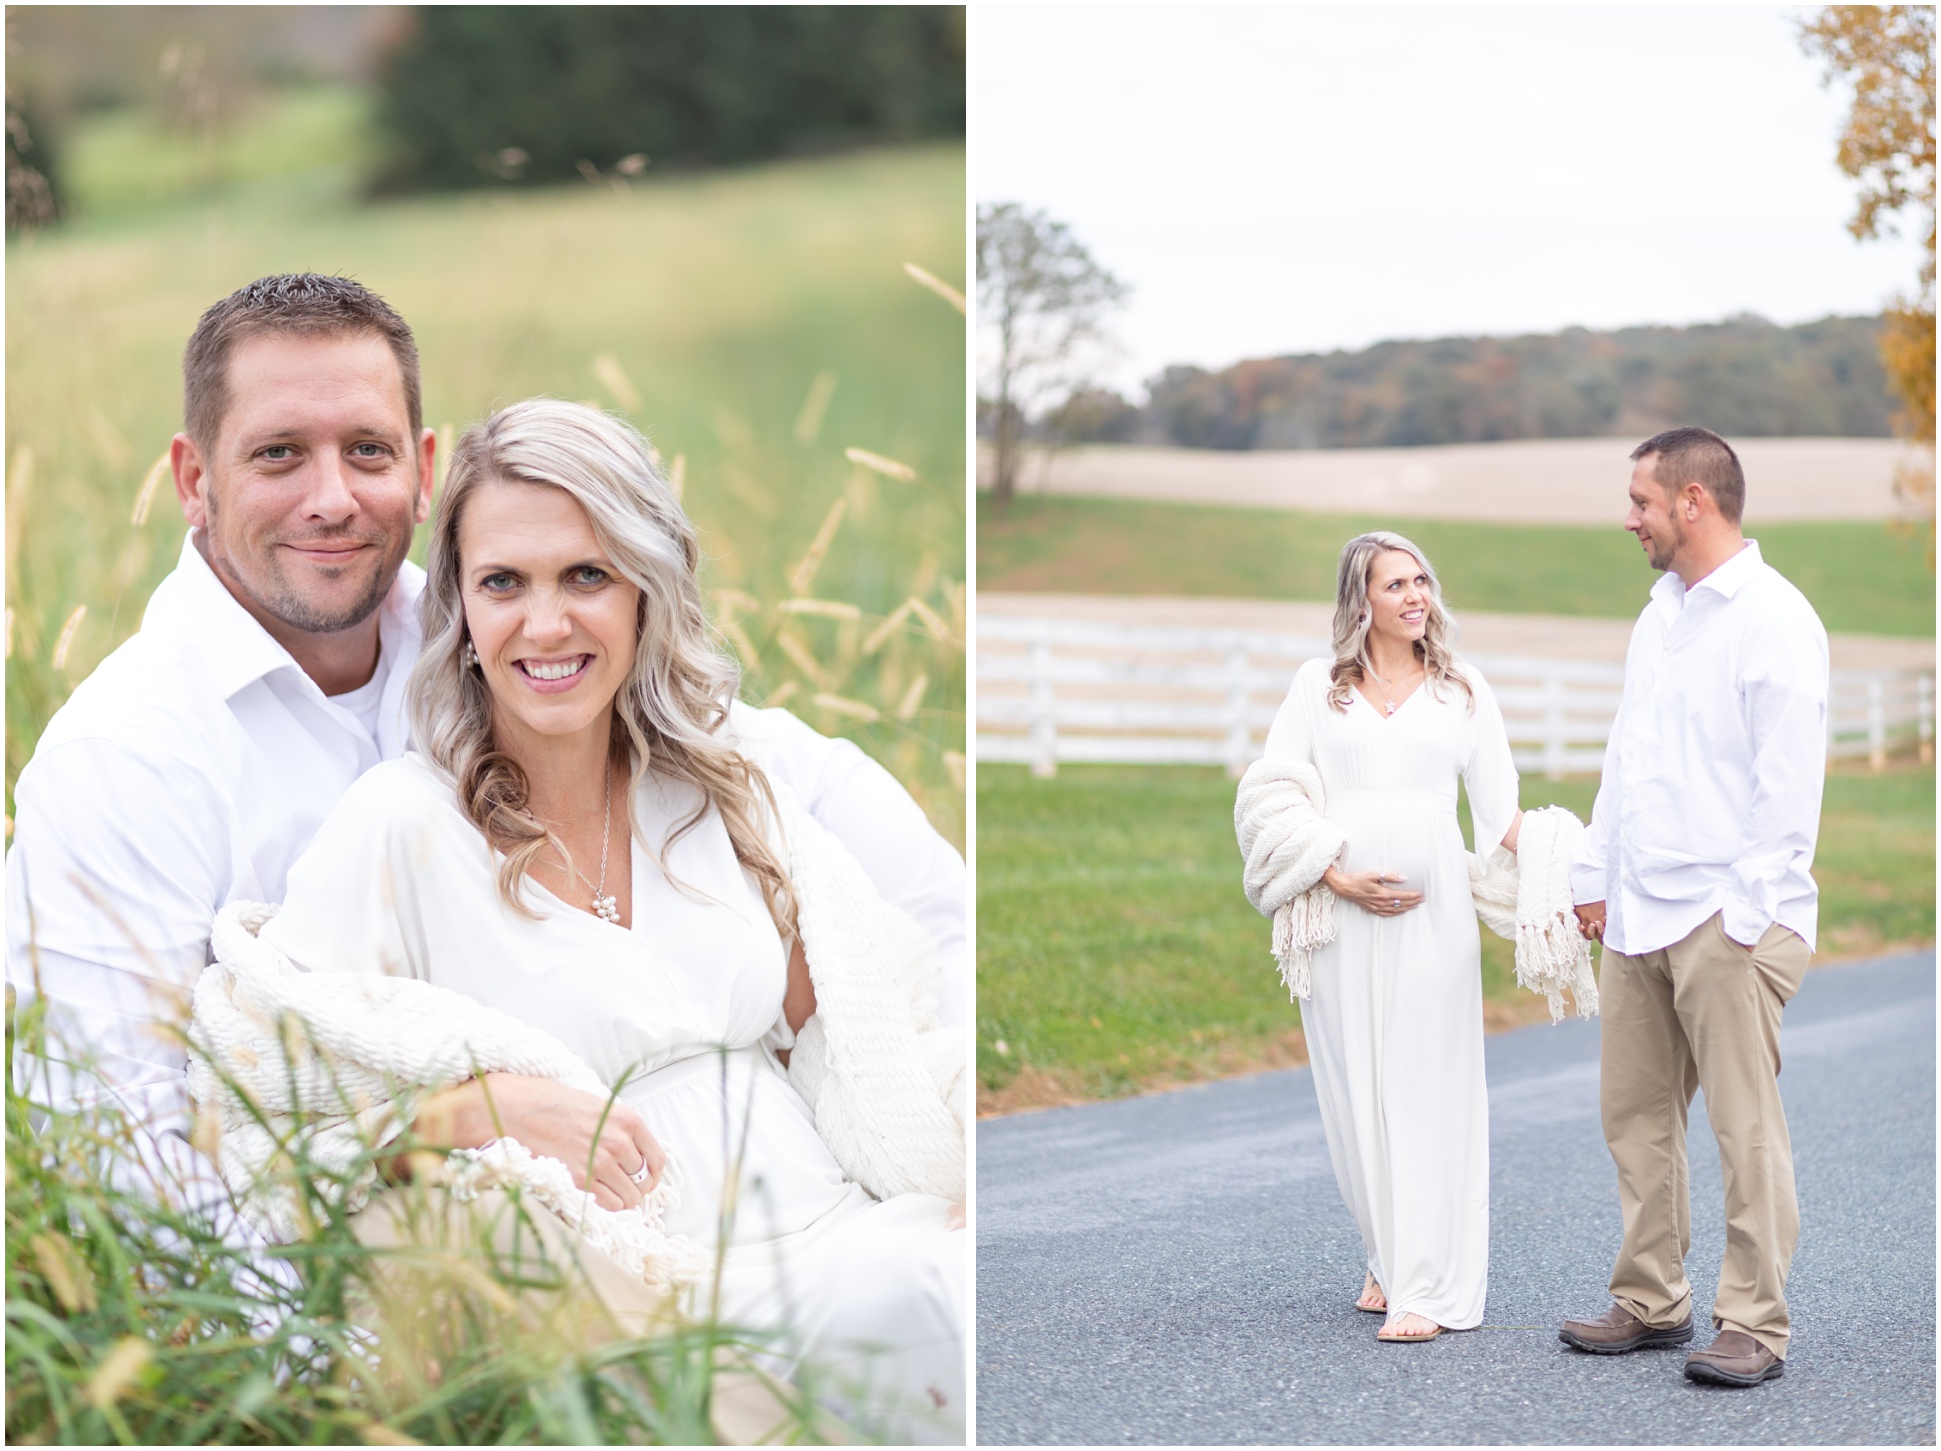 Mom and dad to be walking and snuggling in a field during their maternity session.